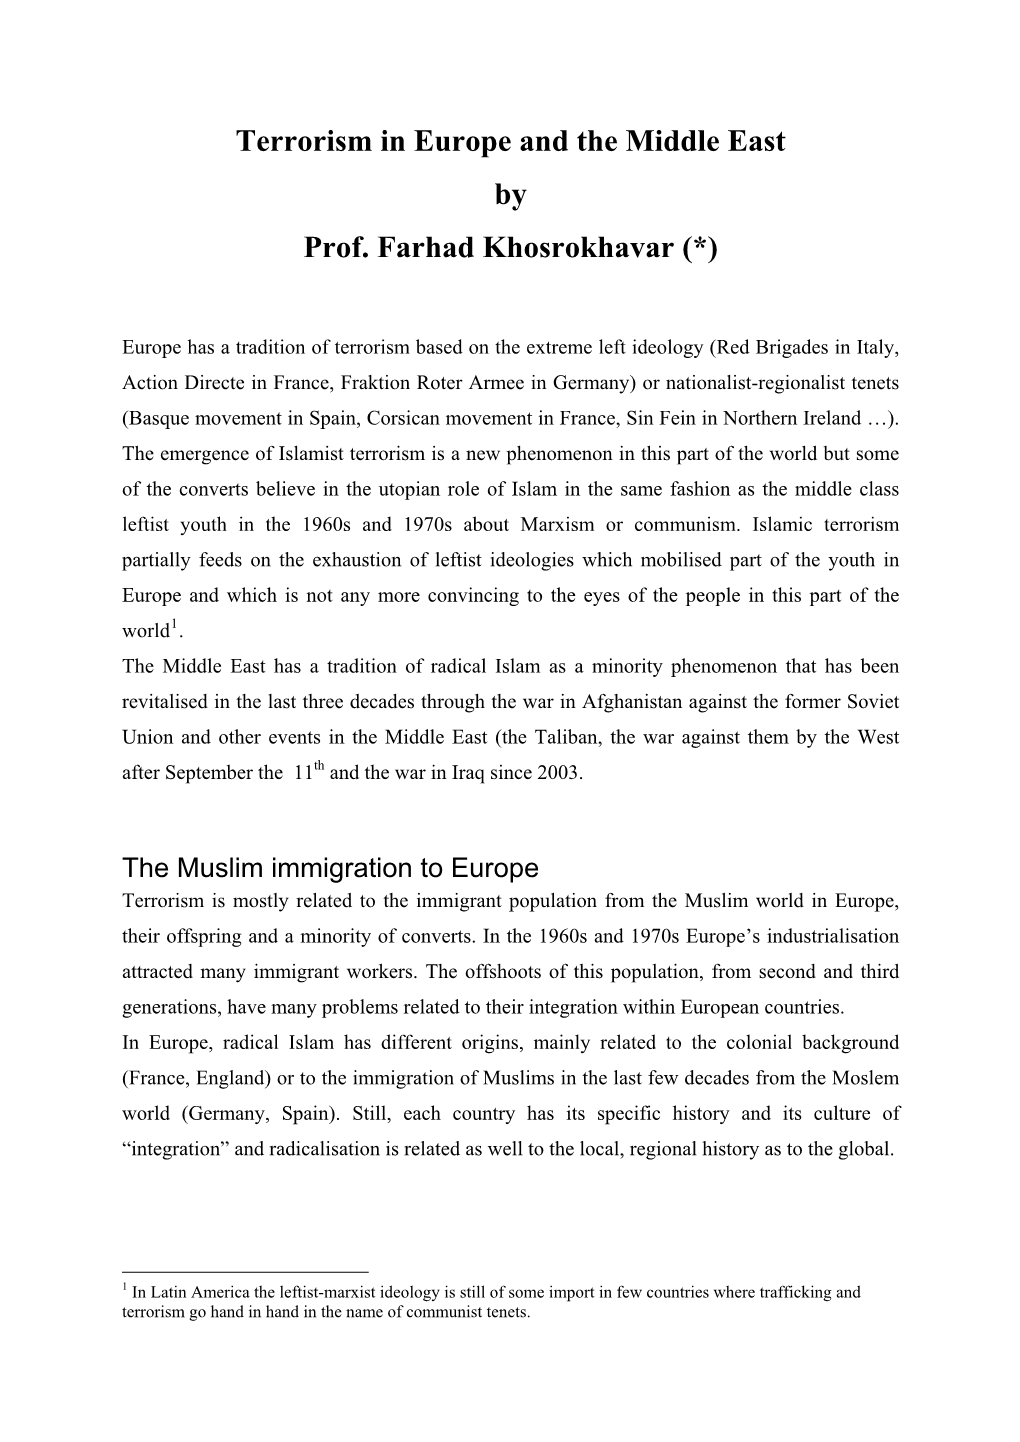 Terrorism in Europe and the Middle East by Prof. Farhad Khosrokhavar (*)